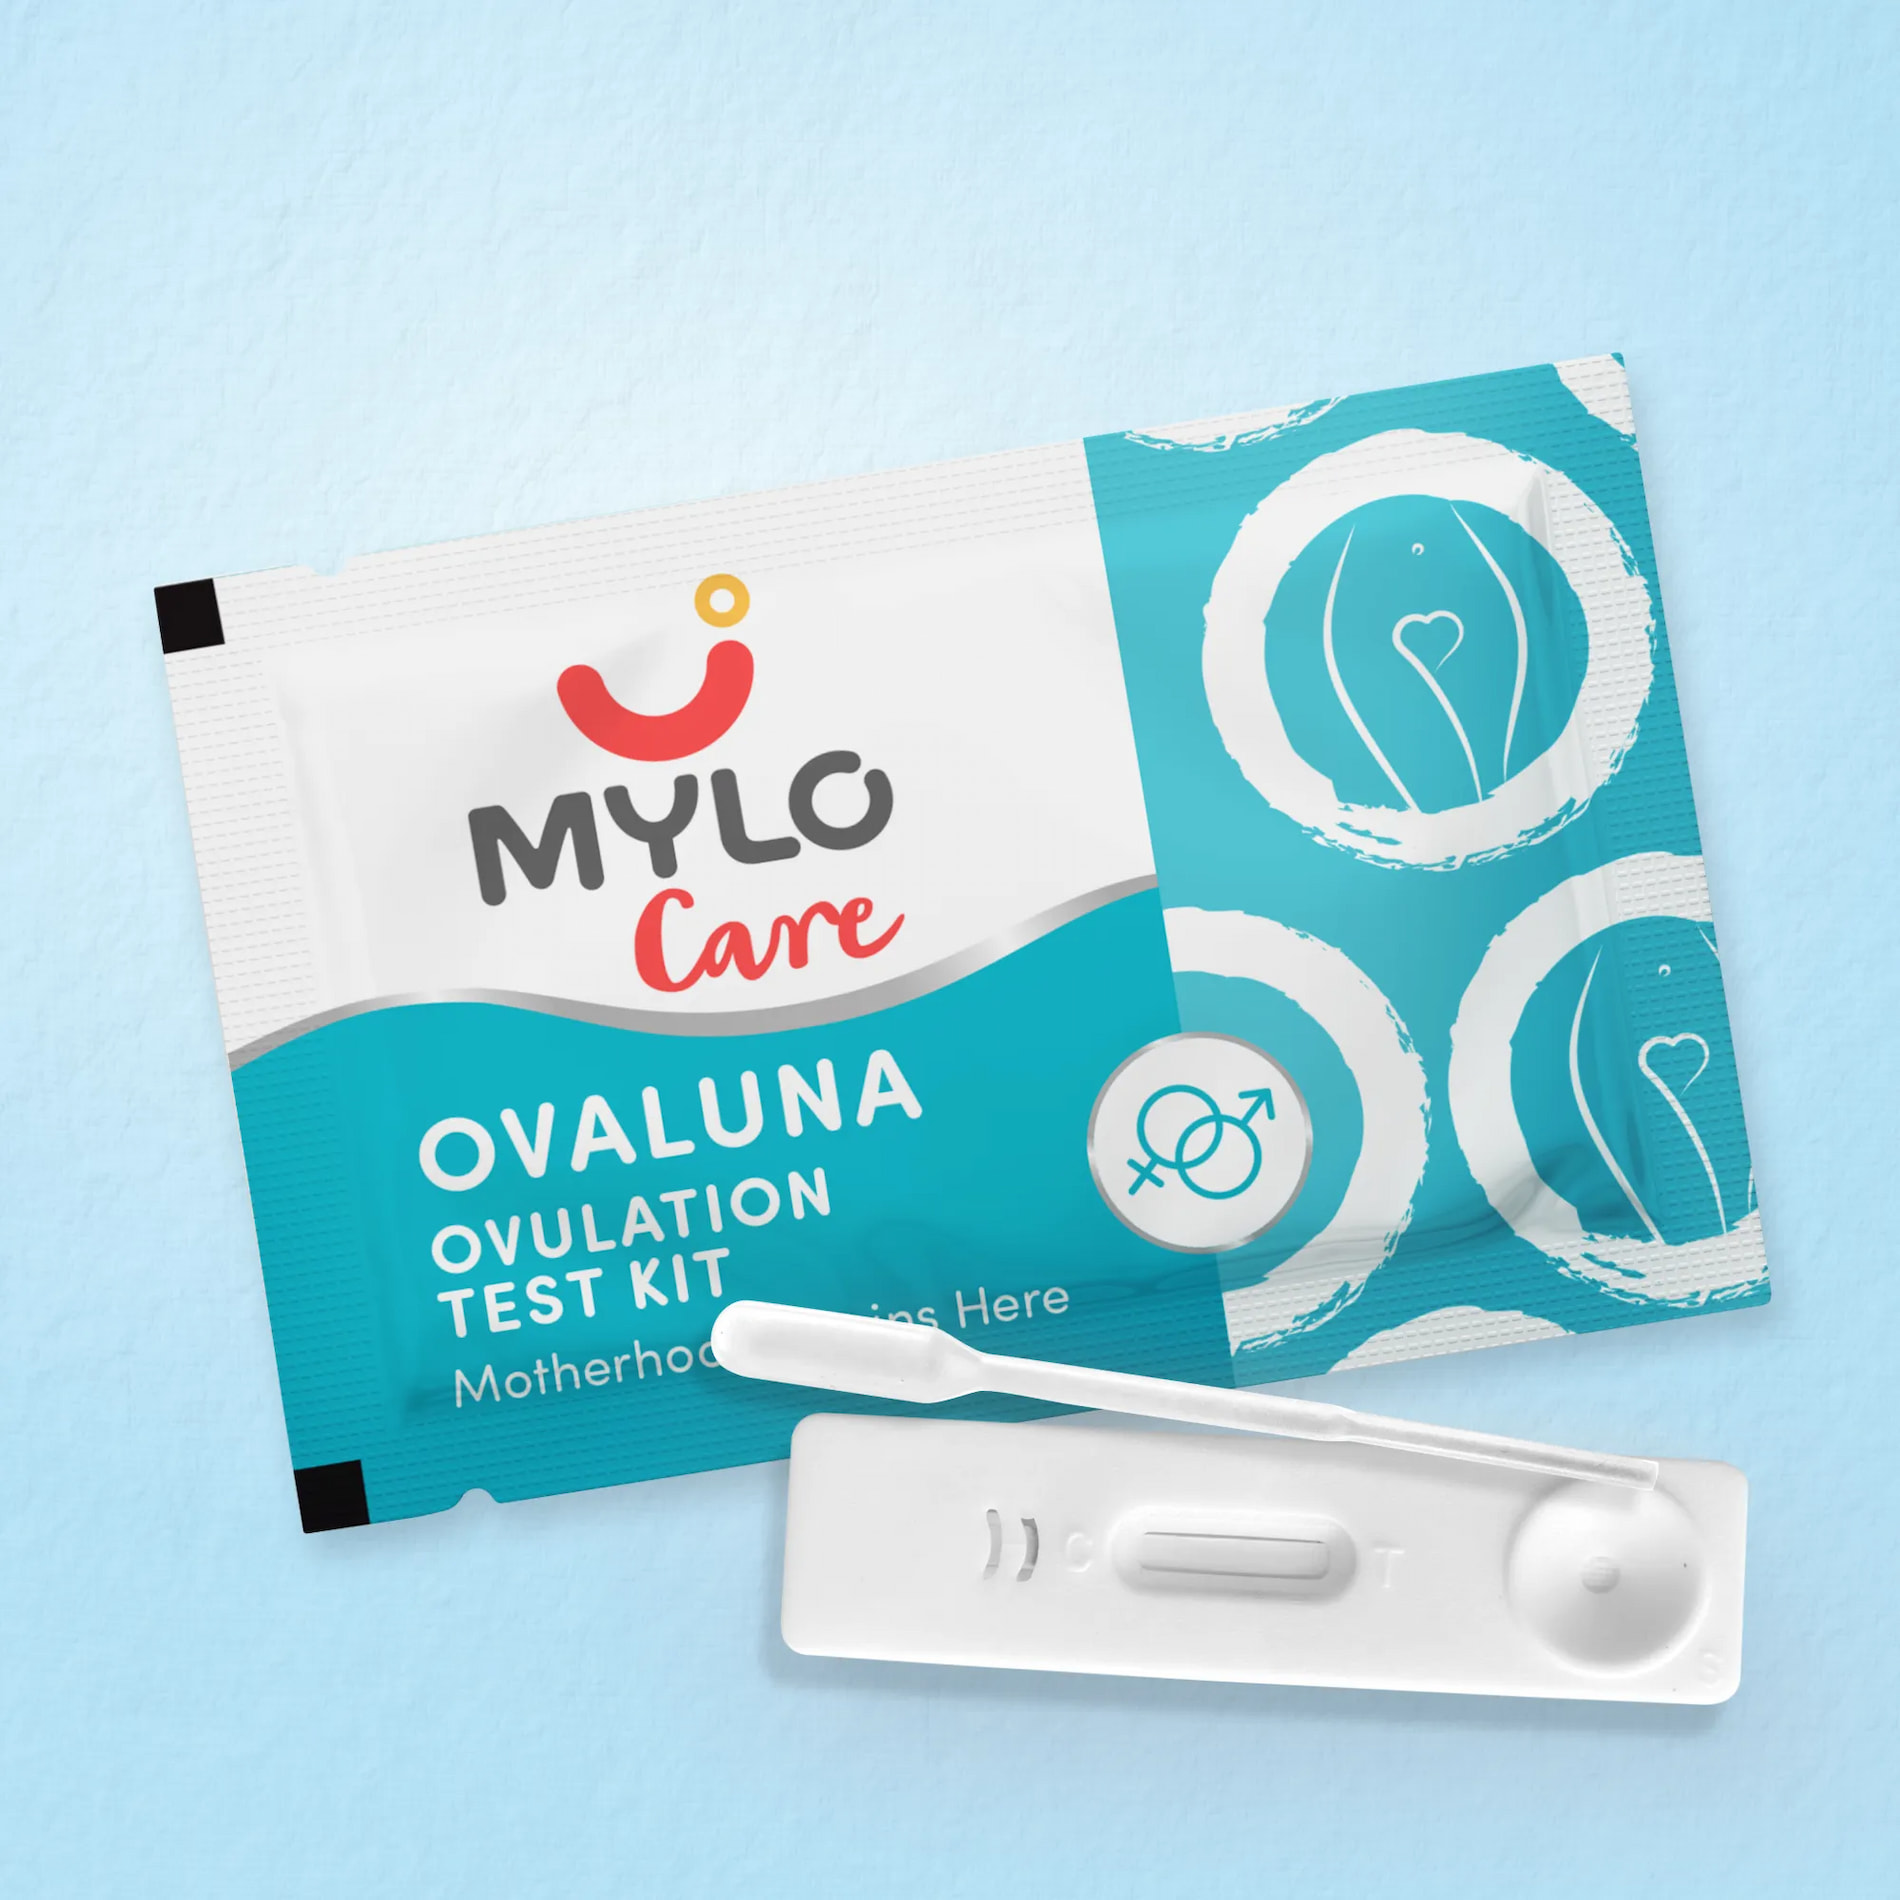 Ovaluna - Ovulation Test Kit - Pack of 5 | Helps Determine Fertile Days | Accurate & Easy to Use | Improves Chances of Conception